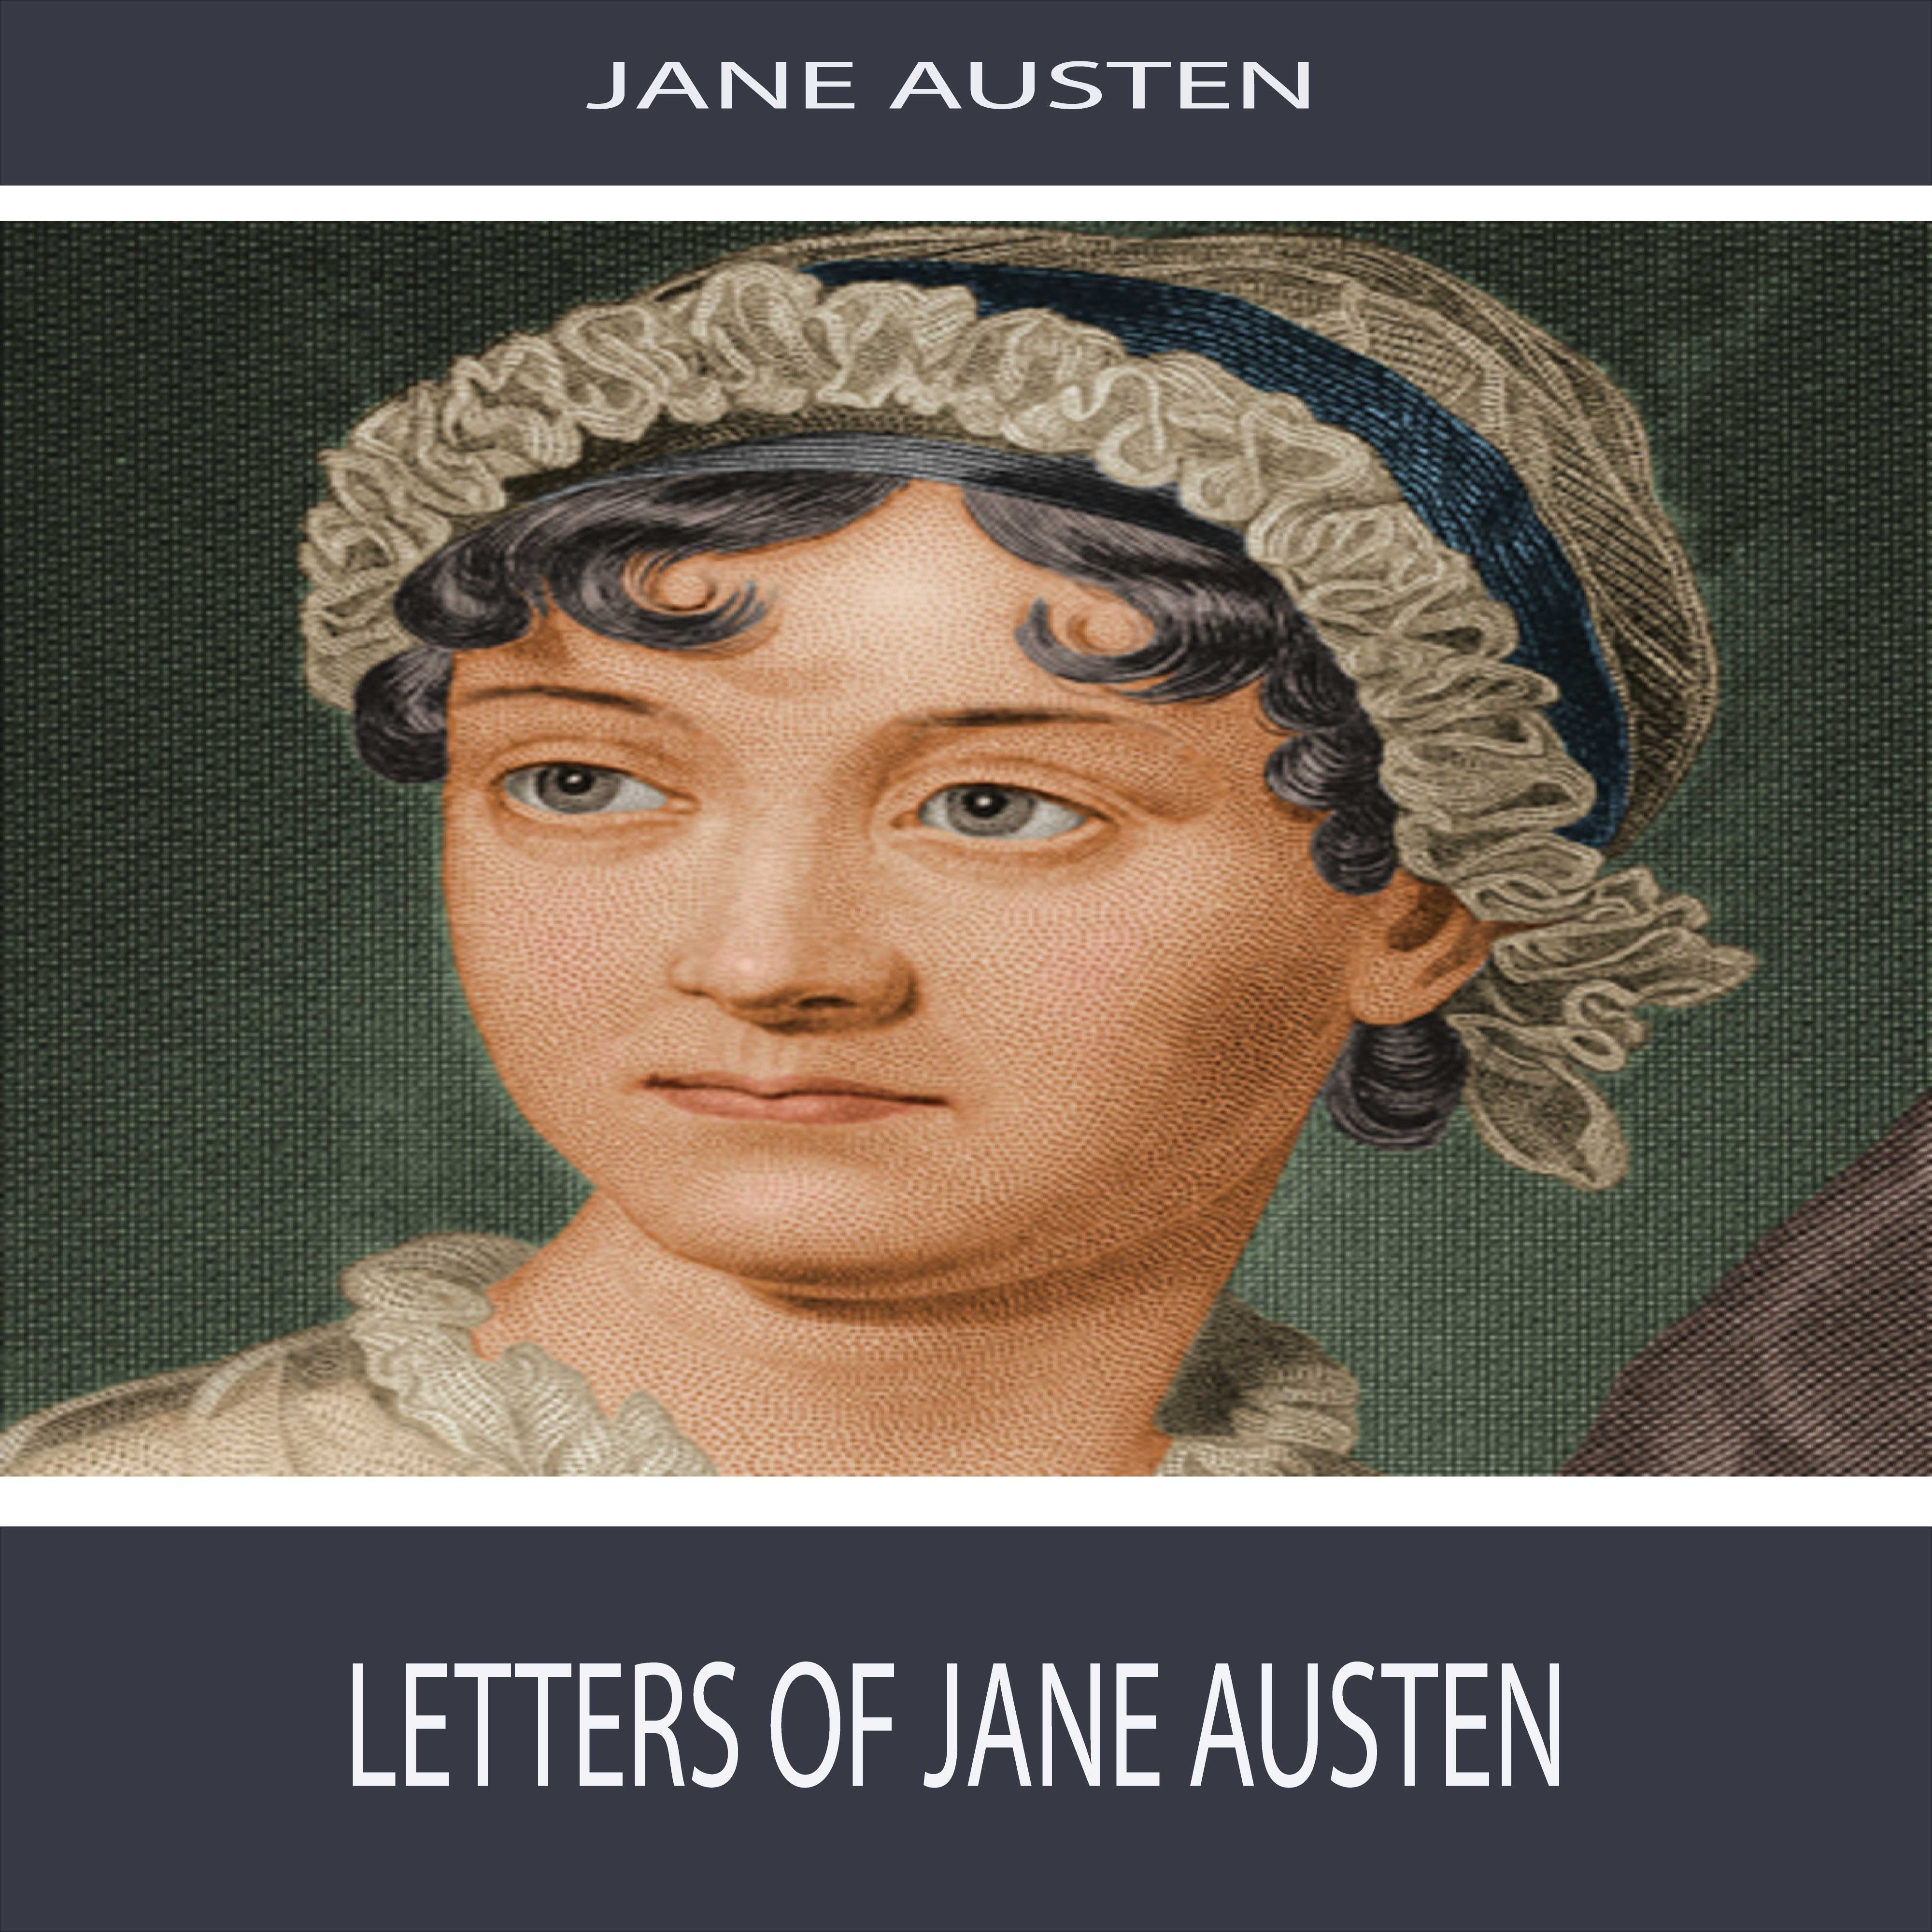 Letters of Jane Austen: Section 29